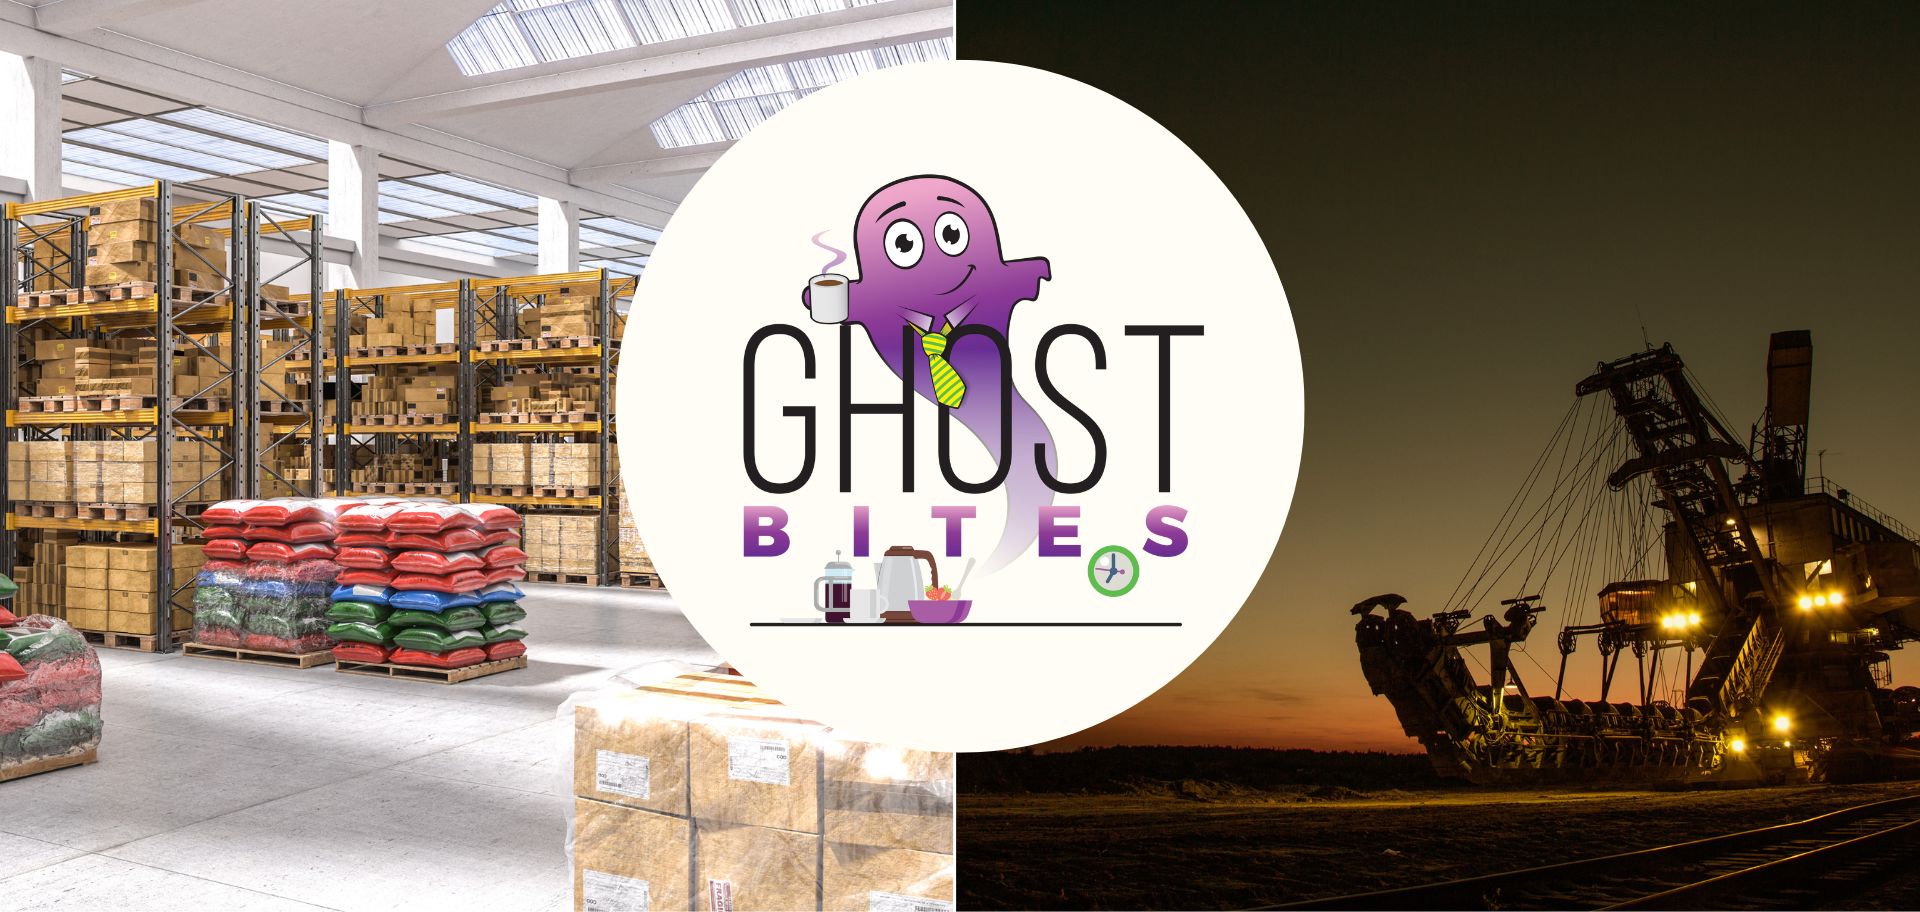 Ghost Bites (Advanced Health | AYO | Cashbuild | EOH | Glencore | Hammerson | Industrials REIT | Investec Property Fund | Pick n Pay | Sirius)